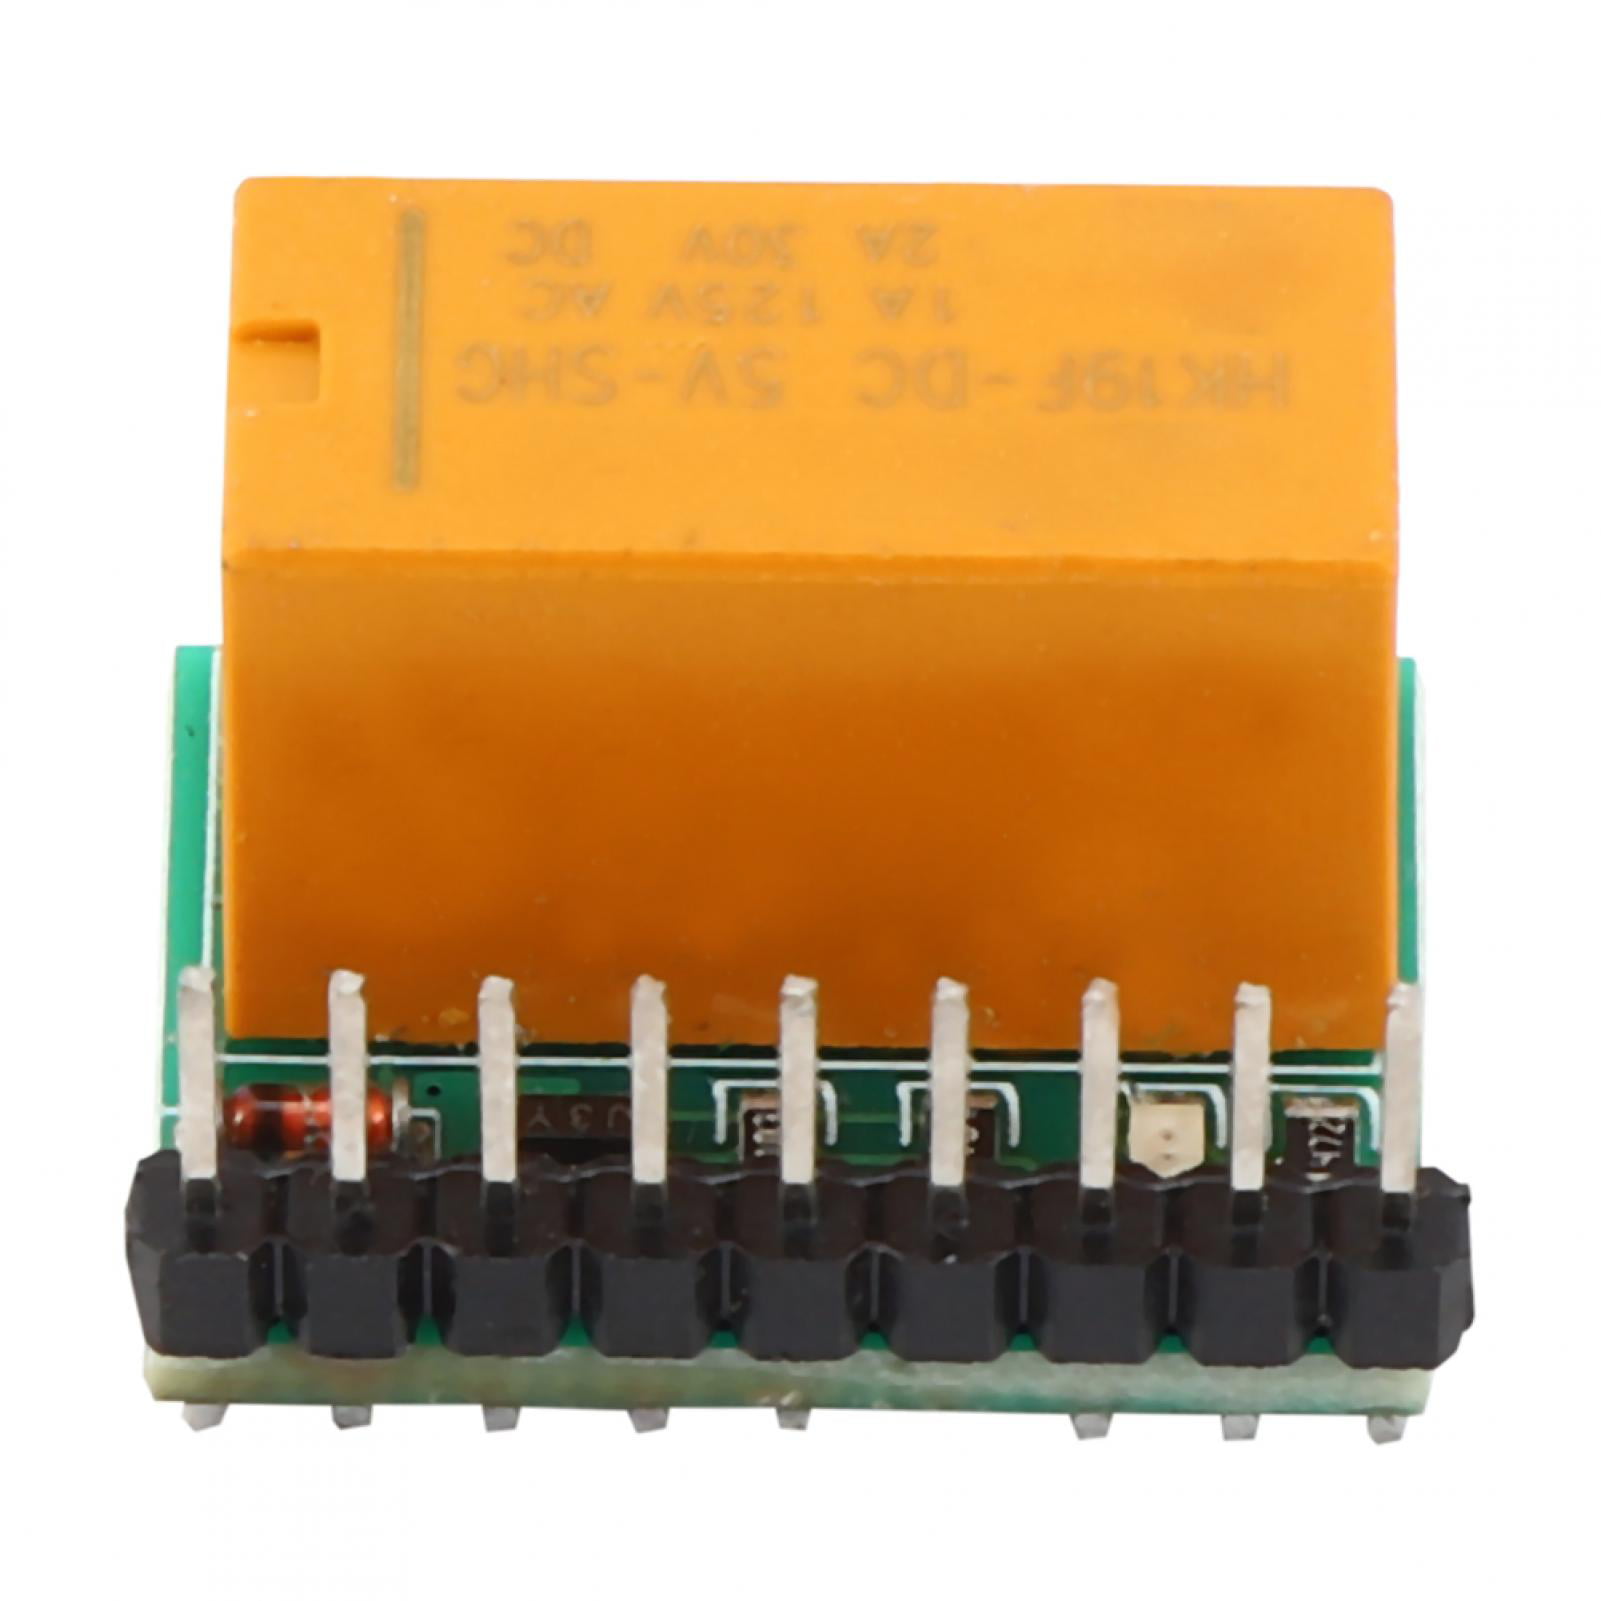 DC 5V Strong Safety Prcatical High Reliability Sturdy DPDT Polarity Reversal Switch Board for Changing the Direction of DC Motor